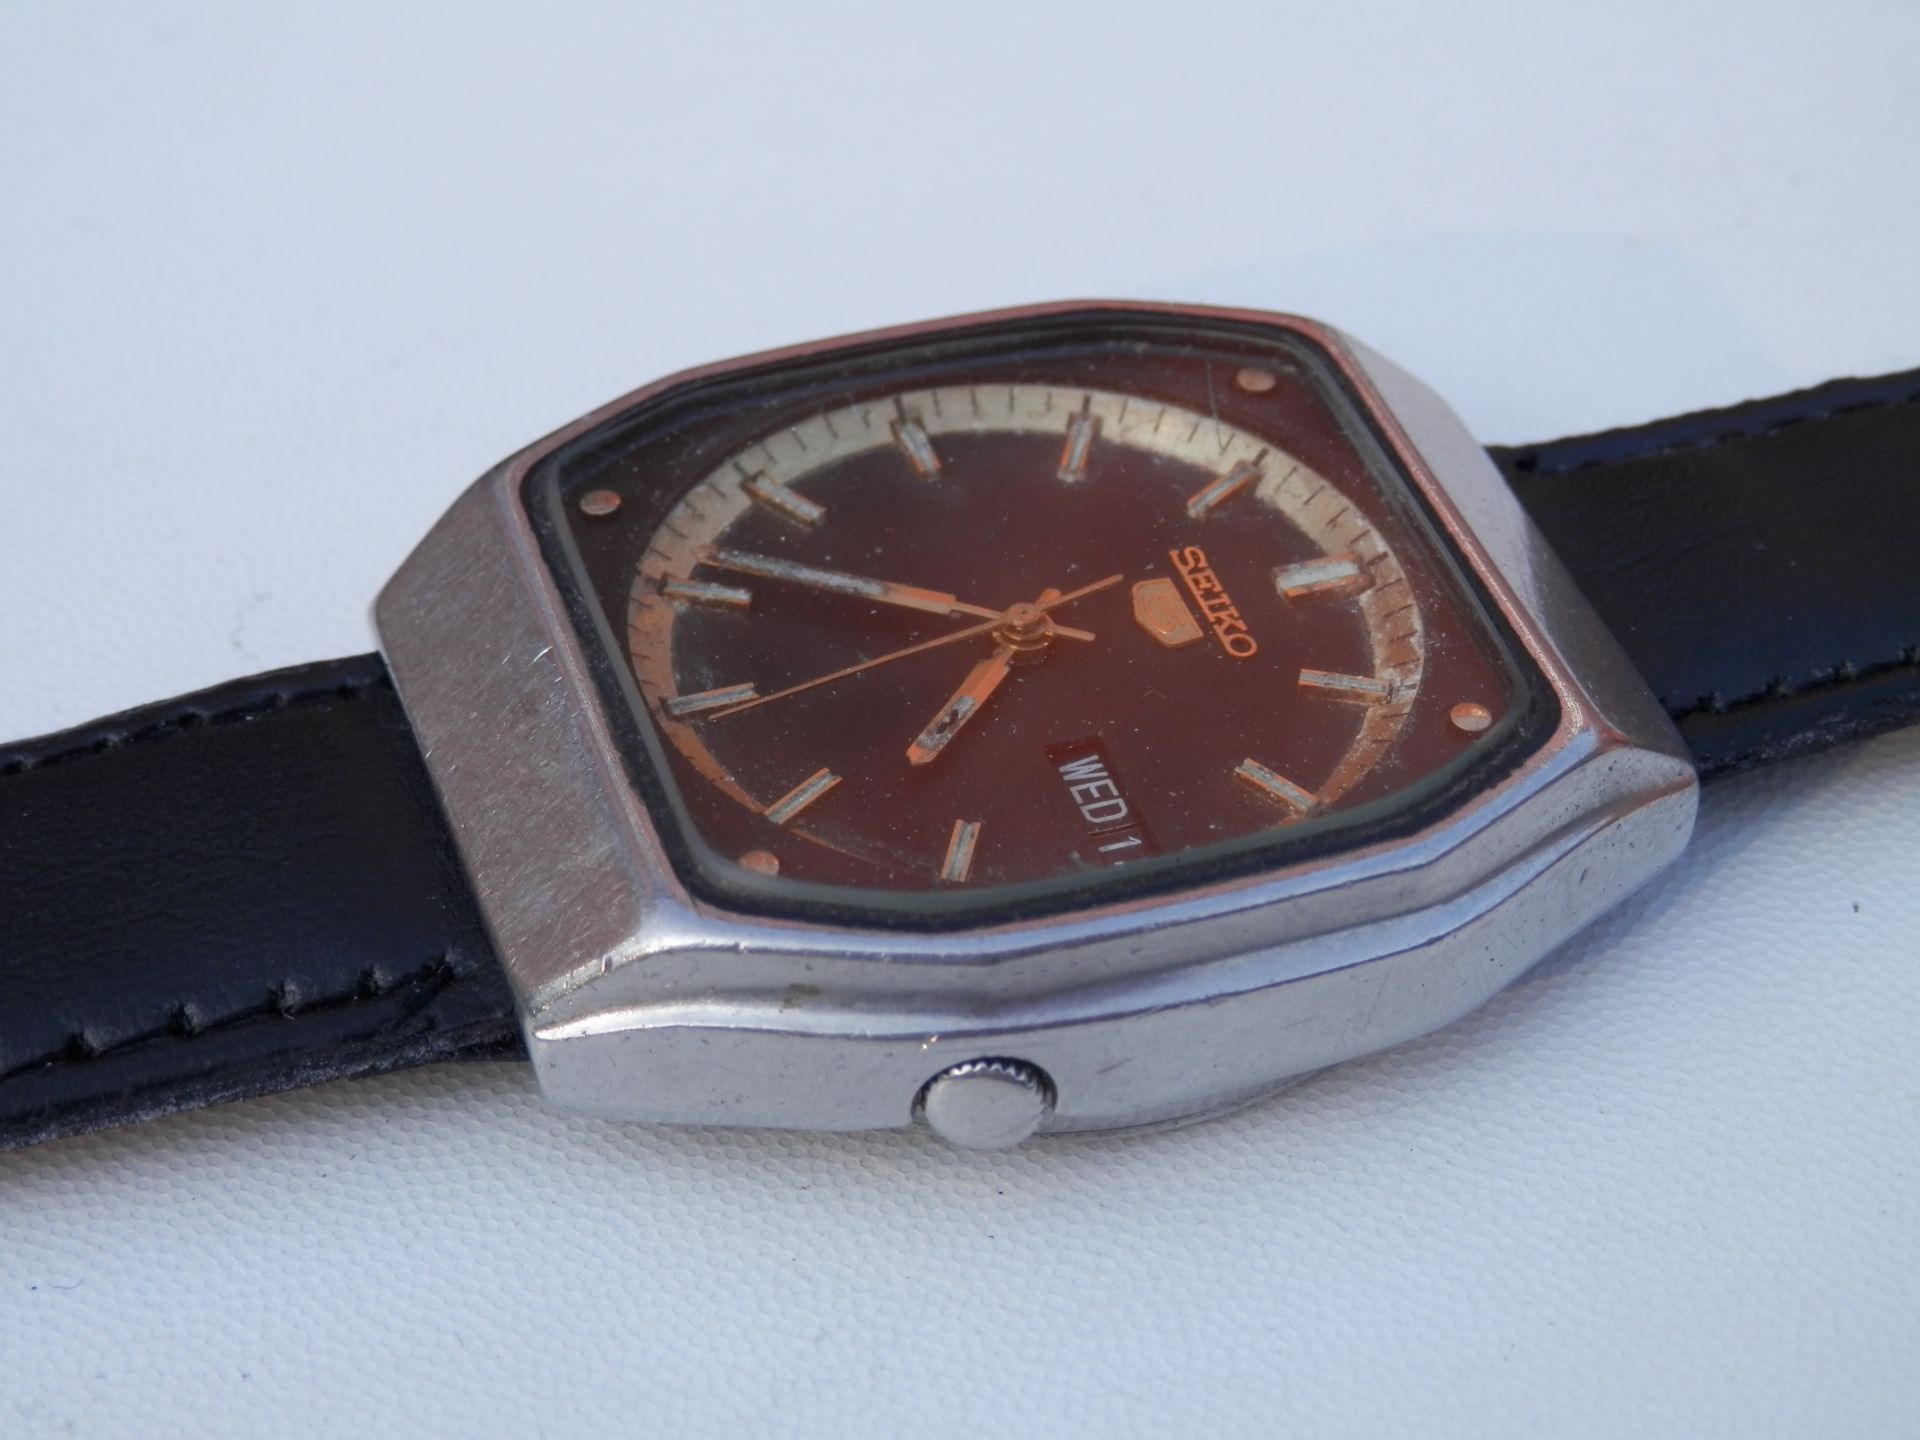 1981 SEIKO 5 AUTOMATIC DAY & DATE JEWELLED WATCH, BLACK & GOLD DIAL, RARE WORKING WATCH - Image 7 of 11